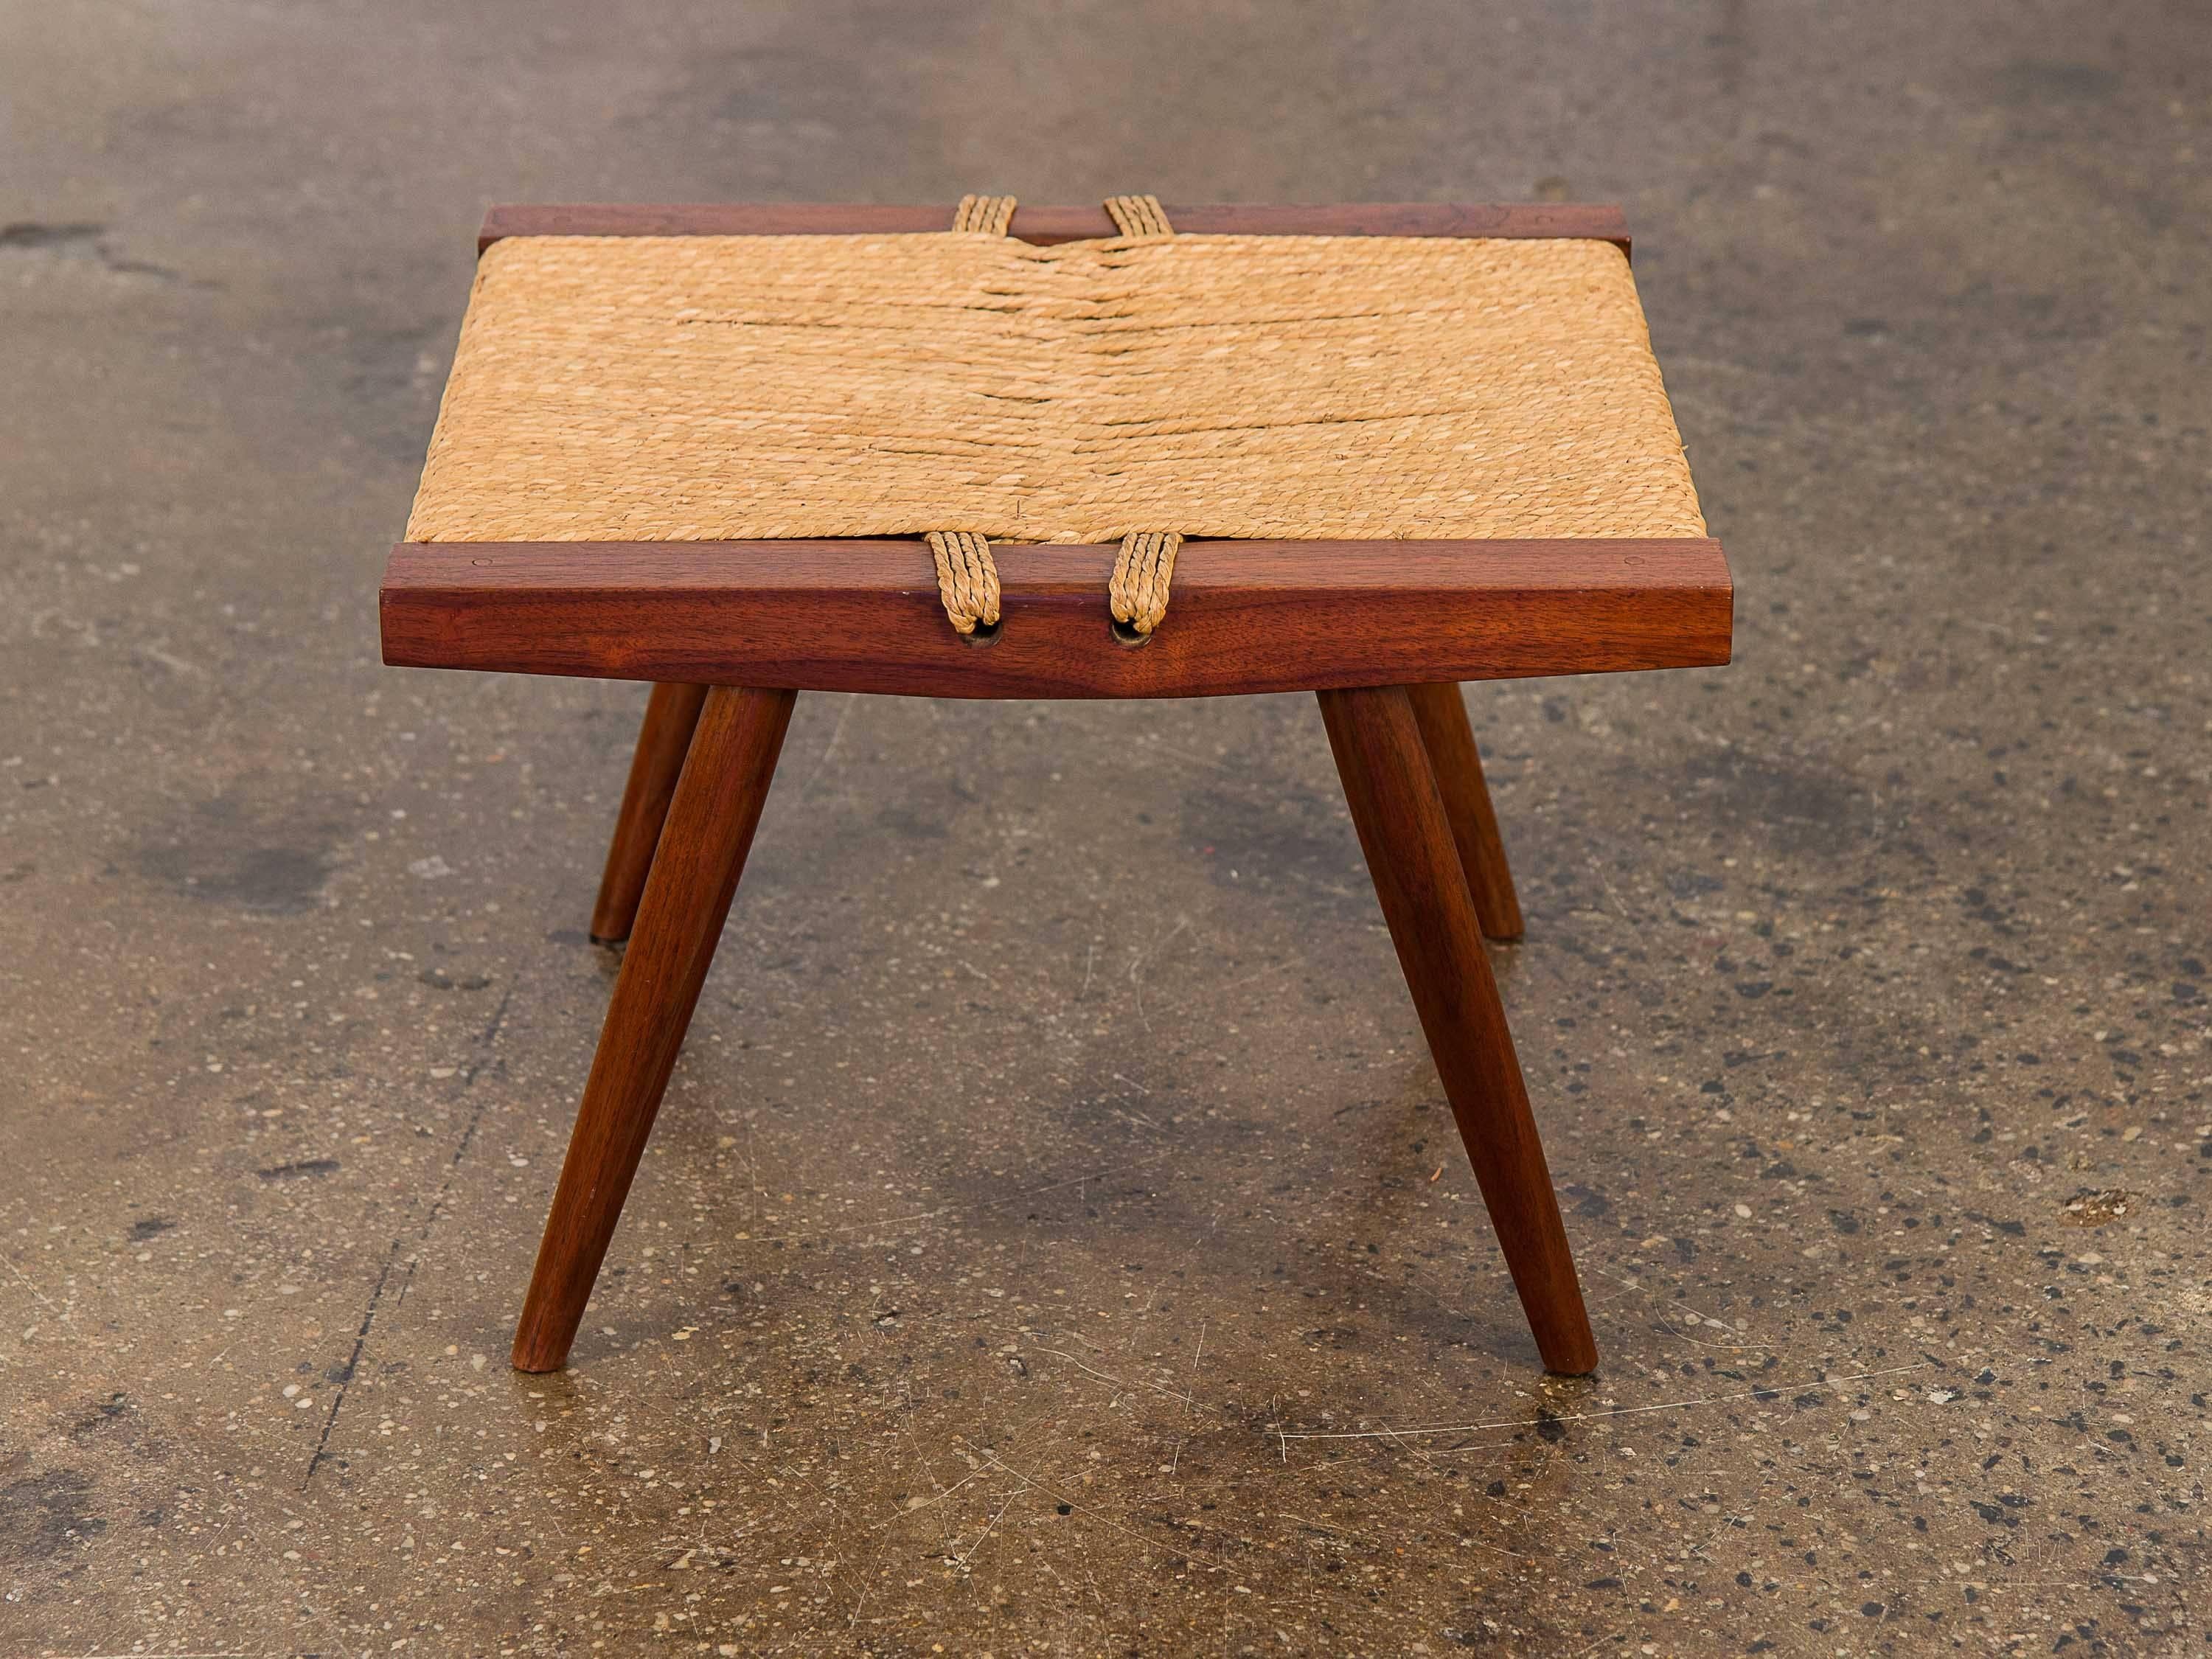 George Nakashima walnut stool with woven grass seat. Japanese knot technique used for the original sea-grass woven seat as well as the beautiful, rich walnut wood frame has seen little sign of wear and is in superb condition. Acquired from the